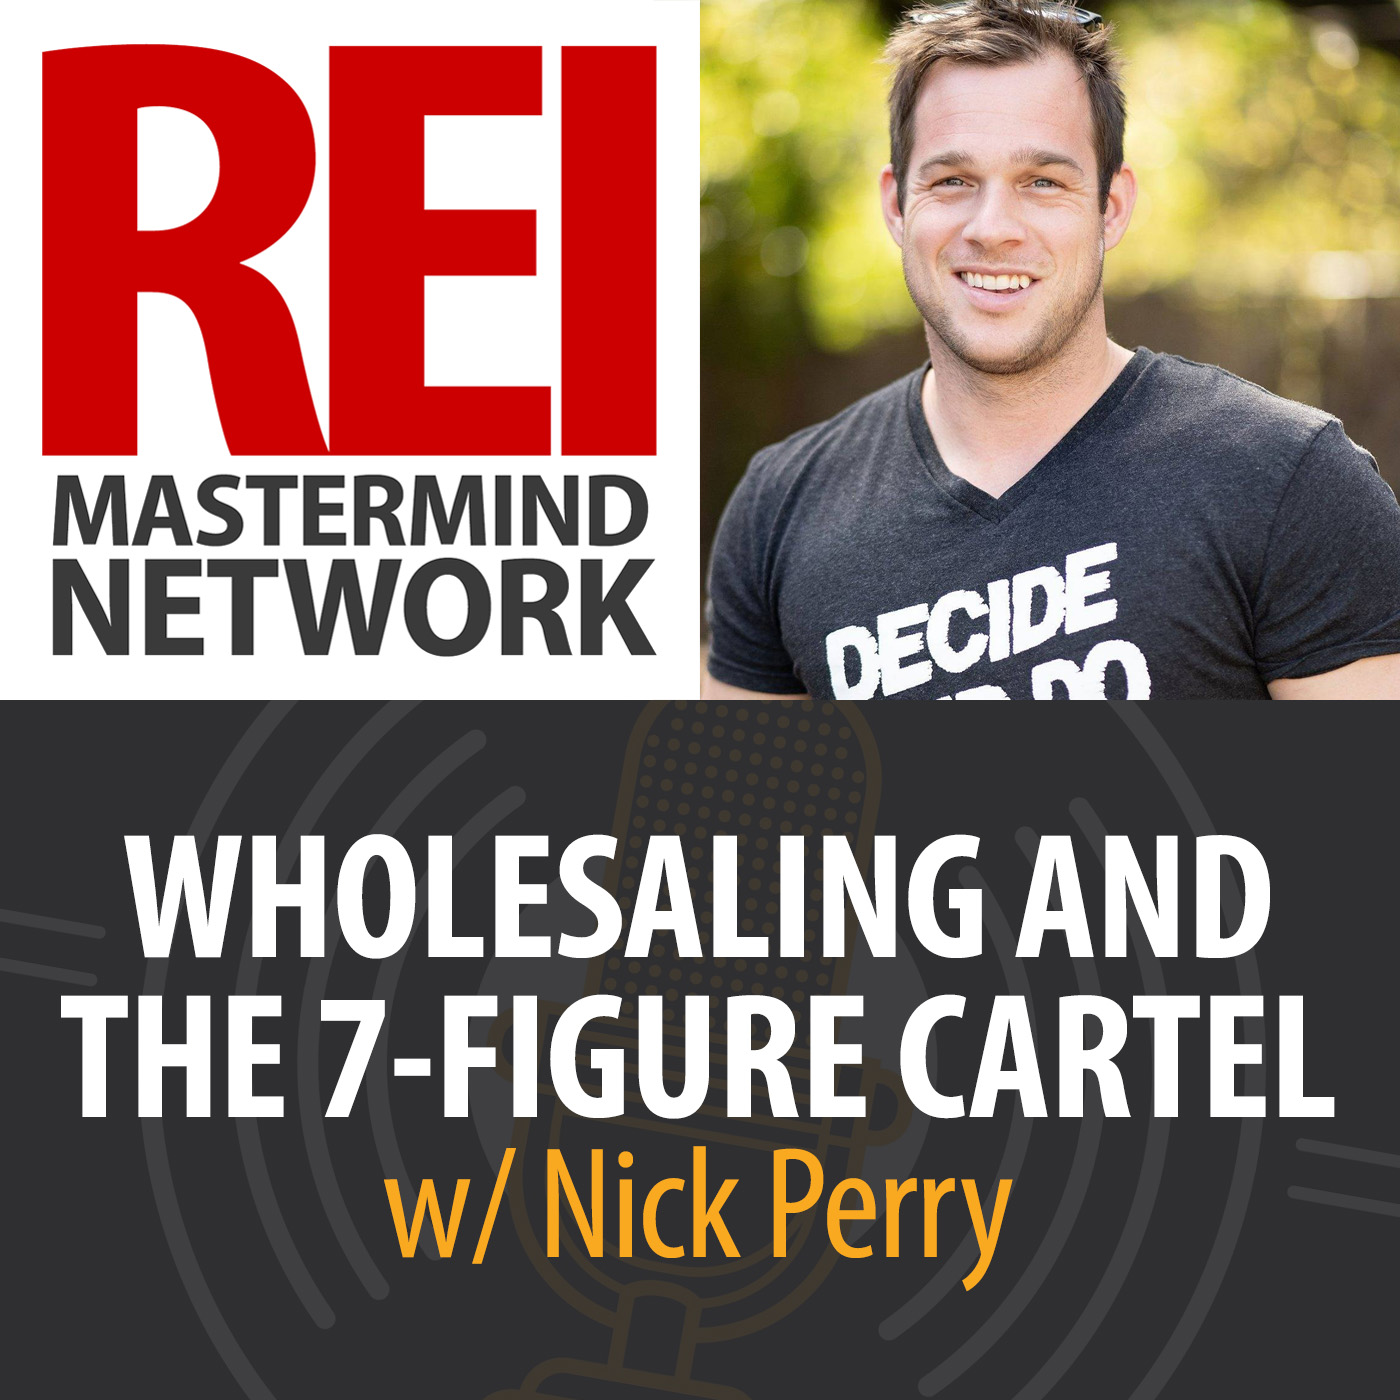 Wholesaling and the 7-Figure Cartel with Nick Perry Image